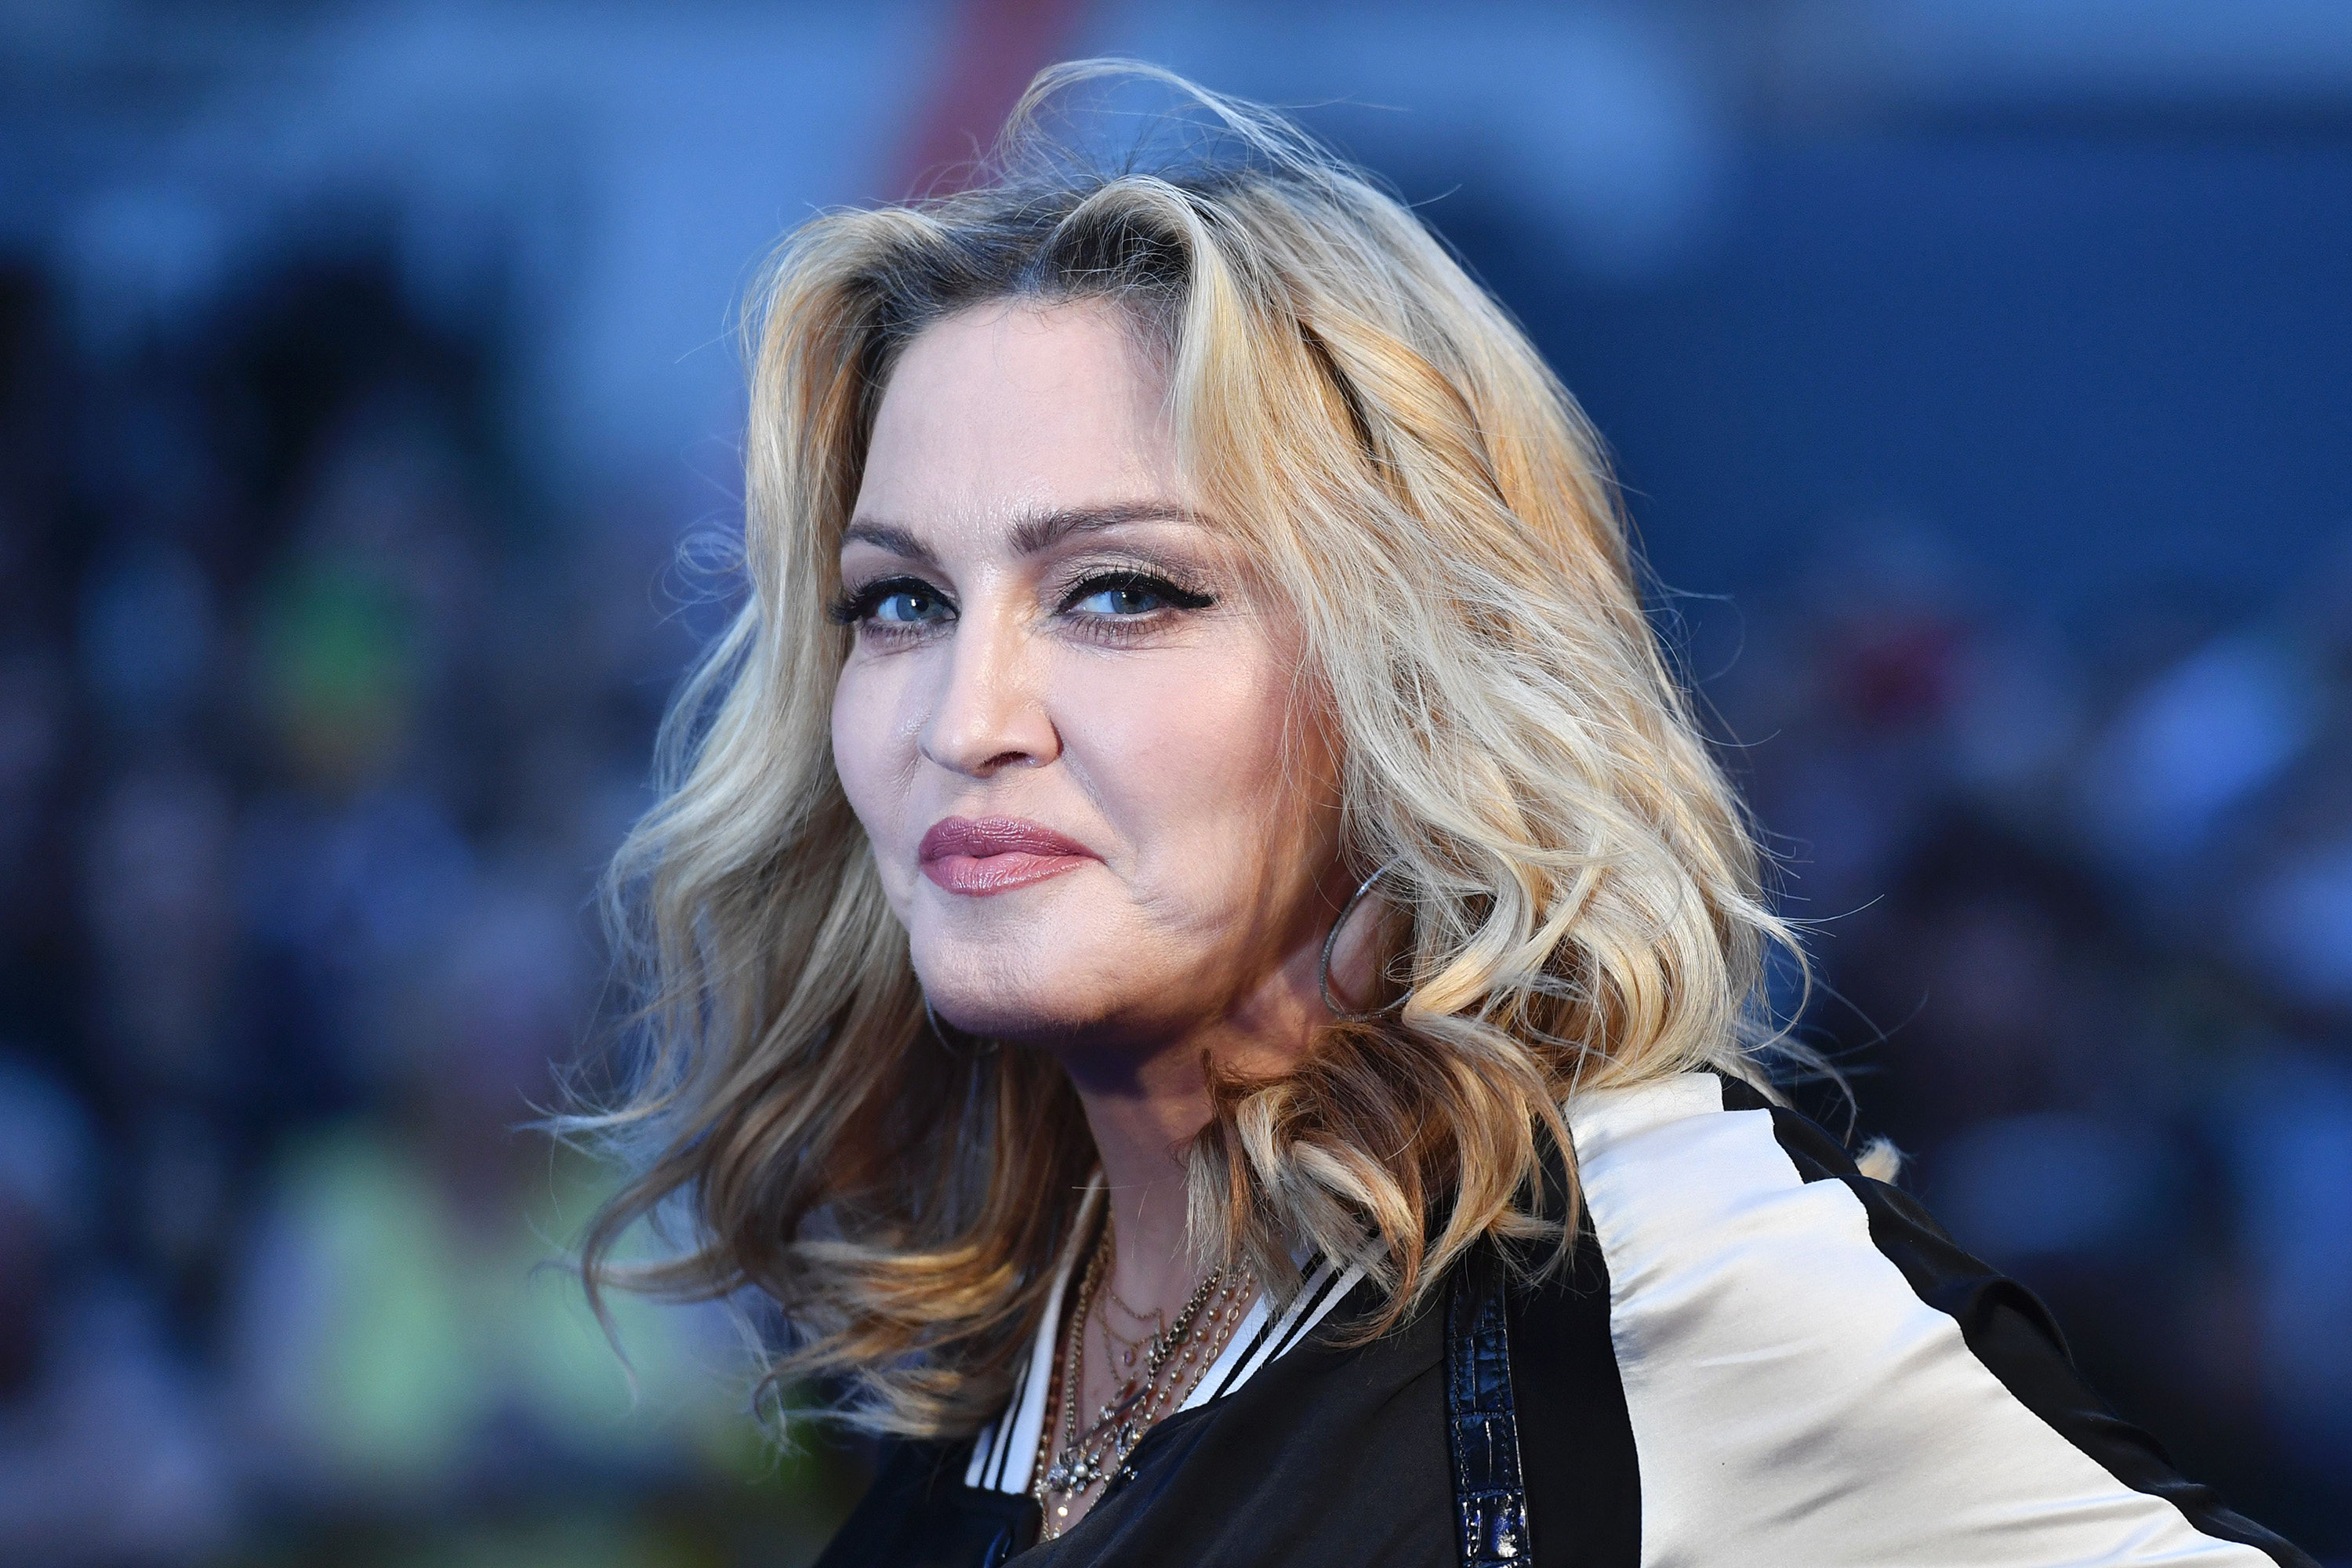 Madonna arrives on the carpet for a film screening in London in September 2016. Photo: TNS